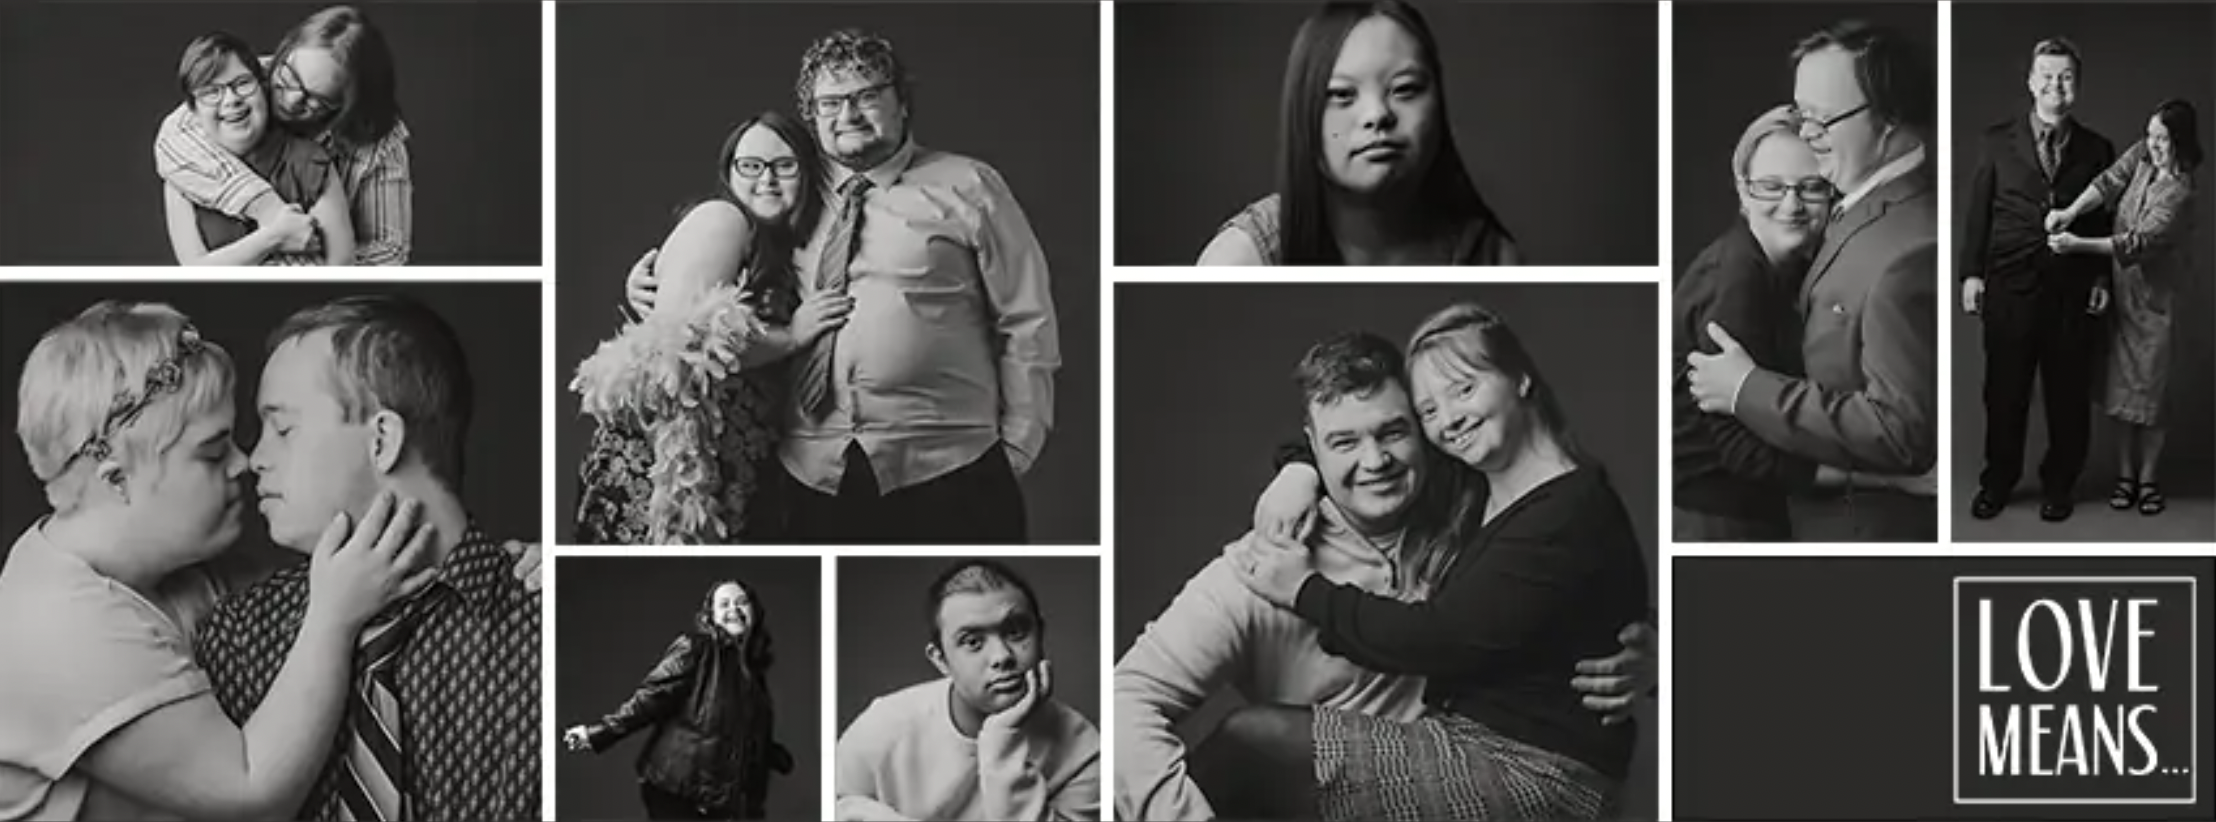 Couples With Down Syndrome in People Magazine